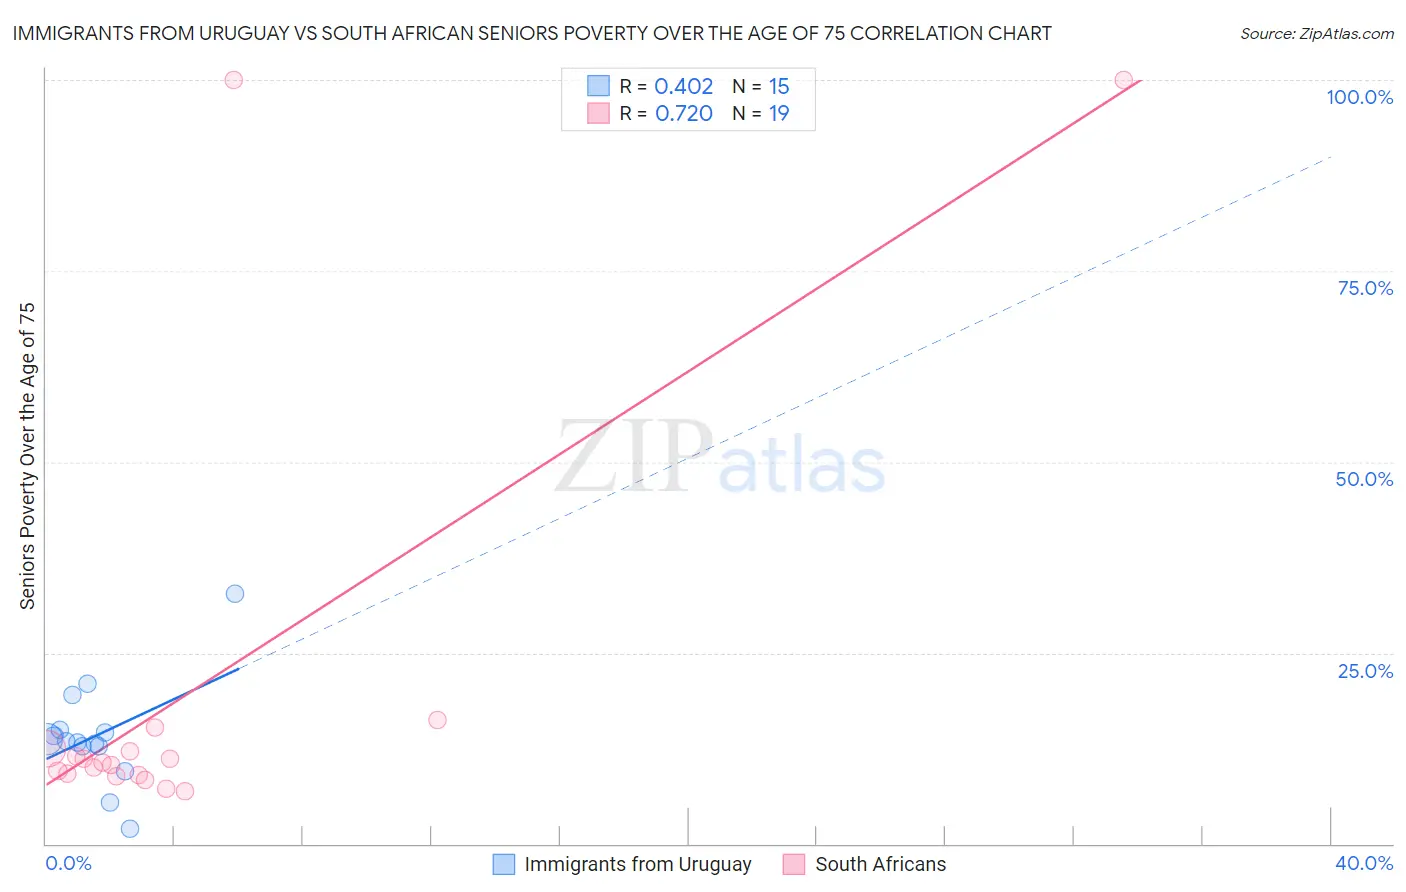 Immigrants from Uruguay vs South African Seniors Poverty Over the Age of 75